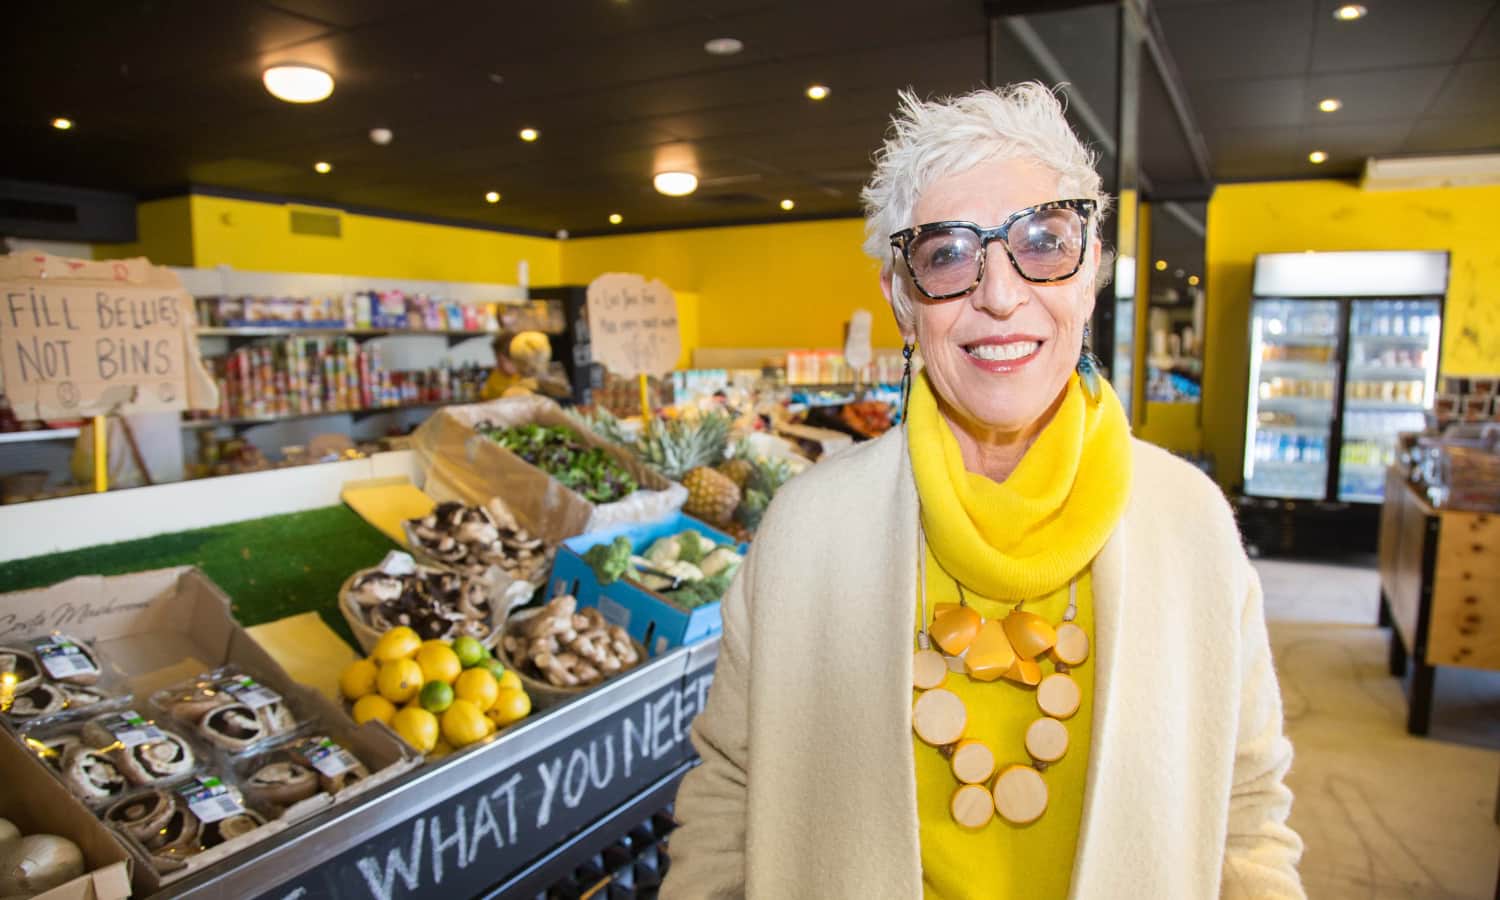 Australia's plan to halve food waste by 2030 is a lofty goal, but the country's biggest food rescue organization, OzHarvest, is working hard to make it happen.